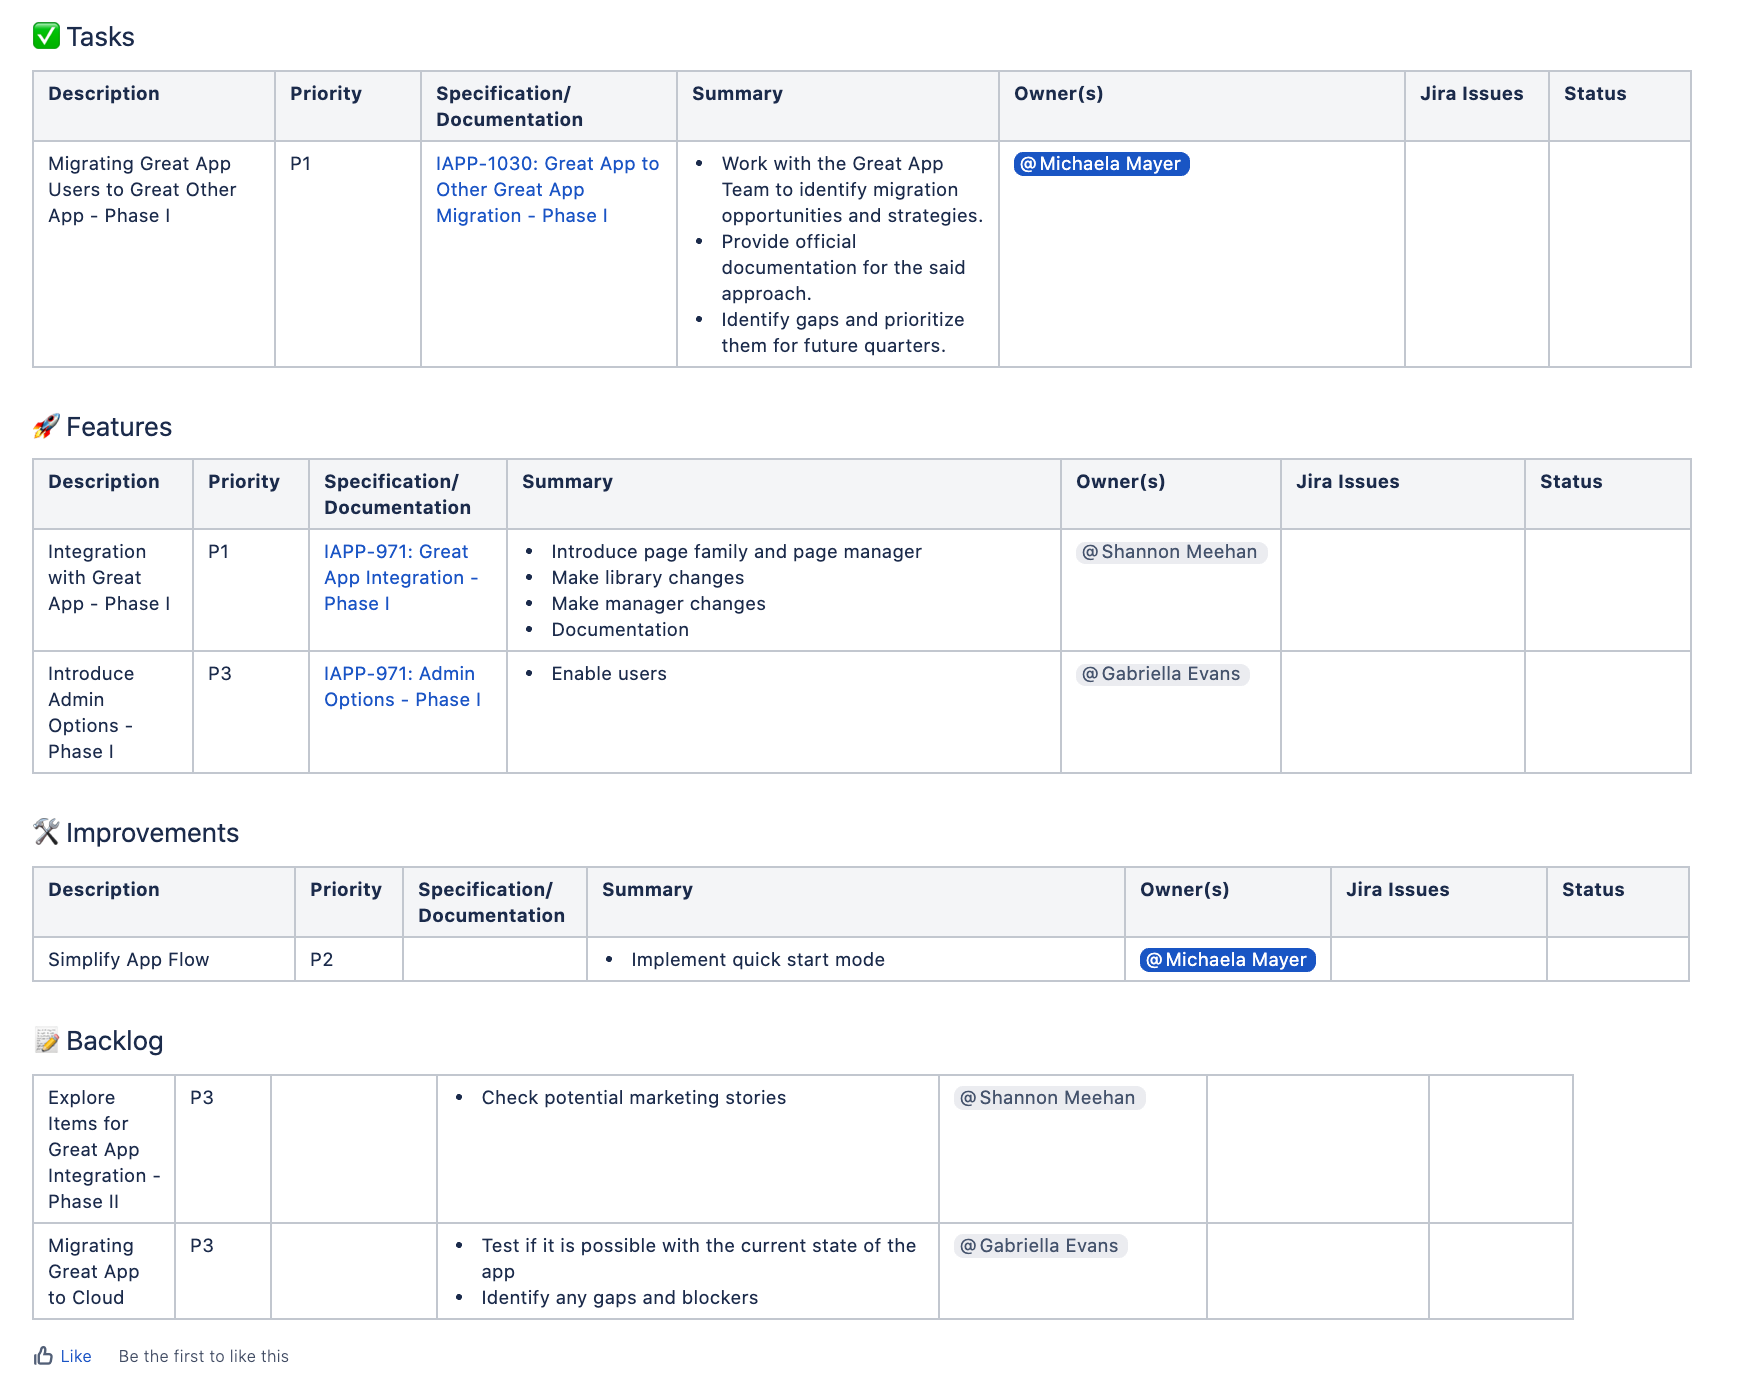 Build a Roadmap Template in Confluence When All You Need is a Page